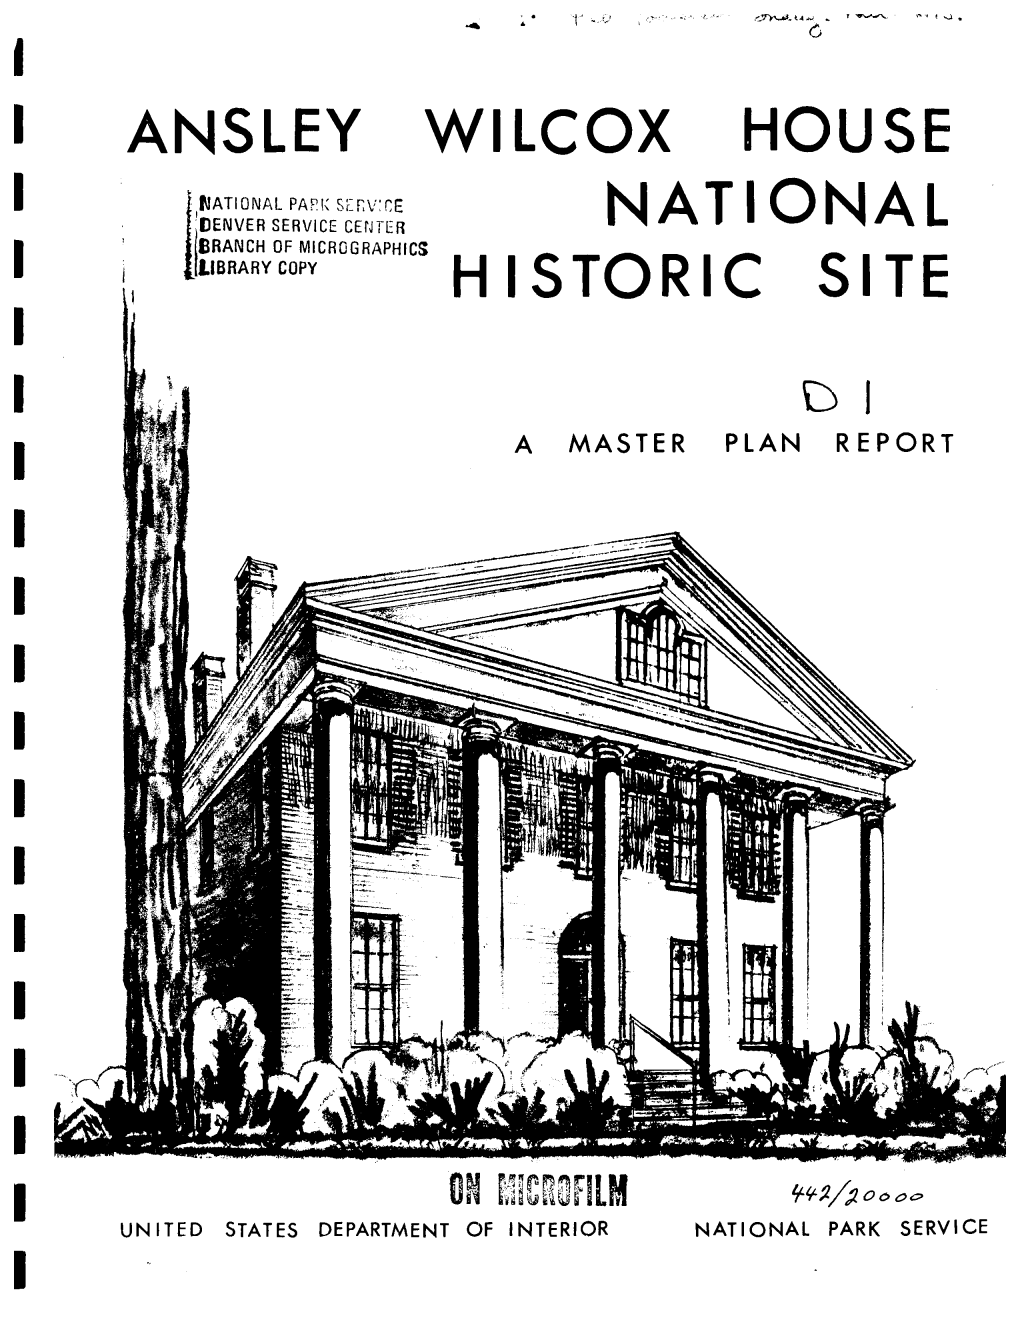 A Master Plan for the Ansley Wilcox House National Historic Site, Buffalo, New York